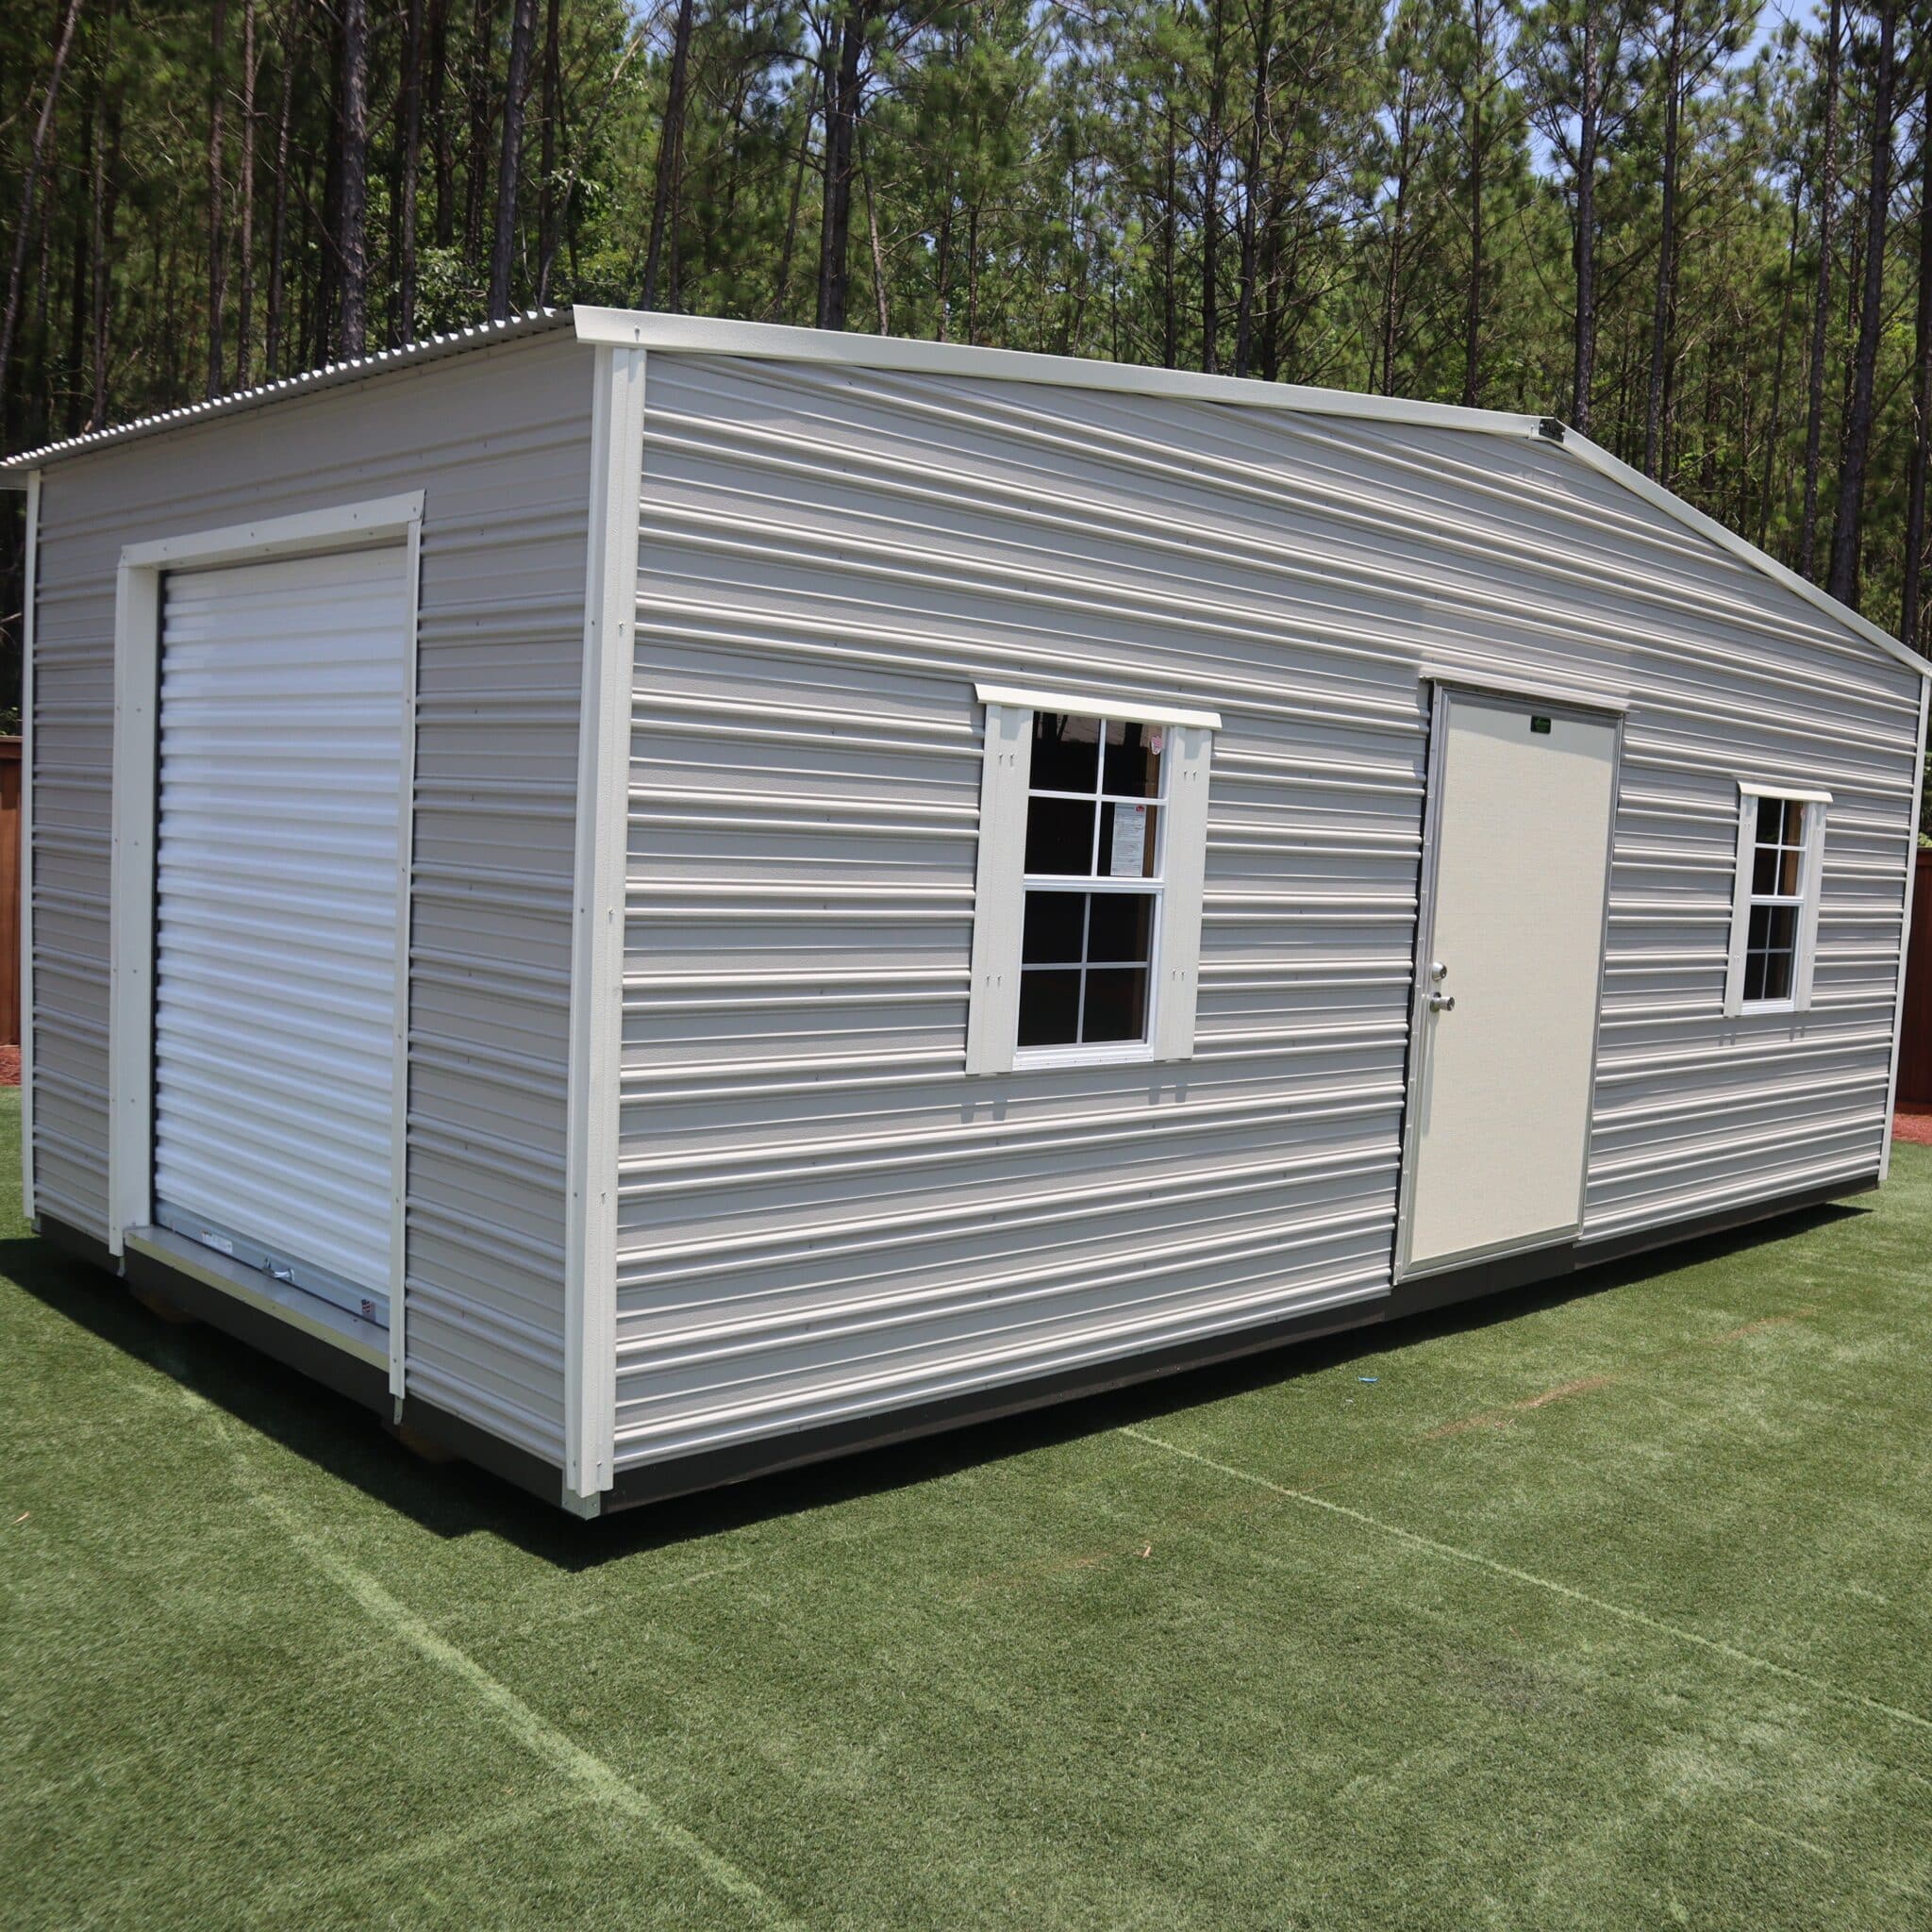 OutdoorOptions Eatonton Georgia 31024 Shed Picture Replace 189 Storage For Your Life Outdoor Options